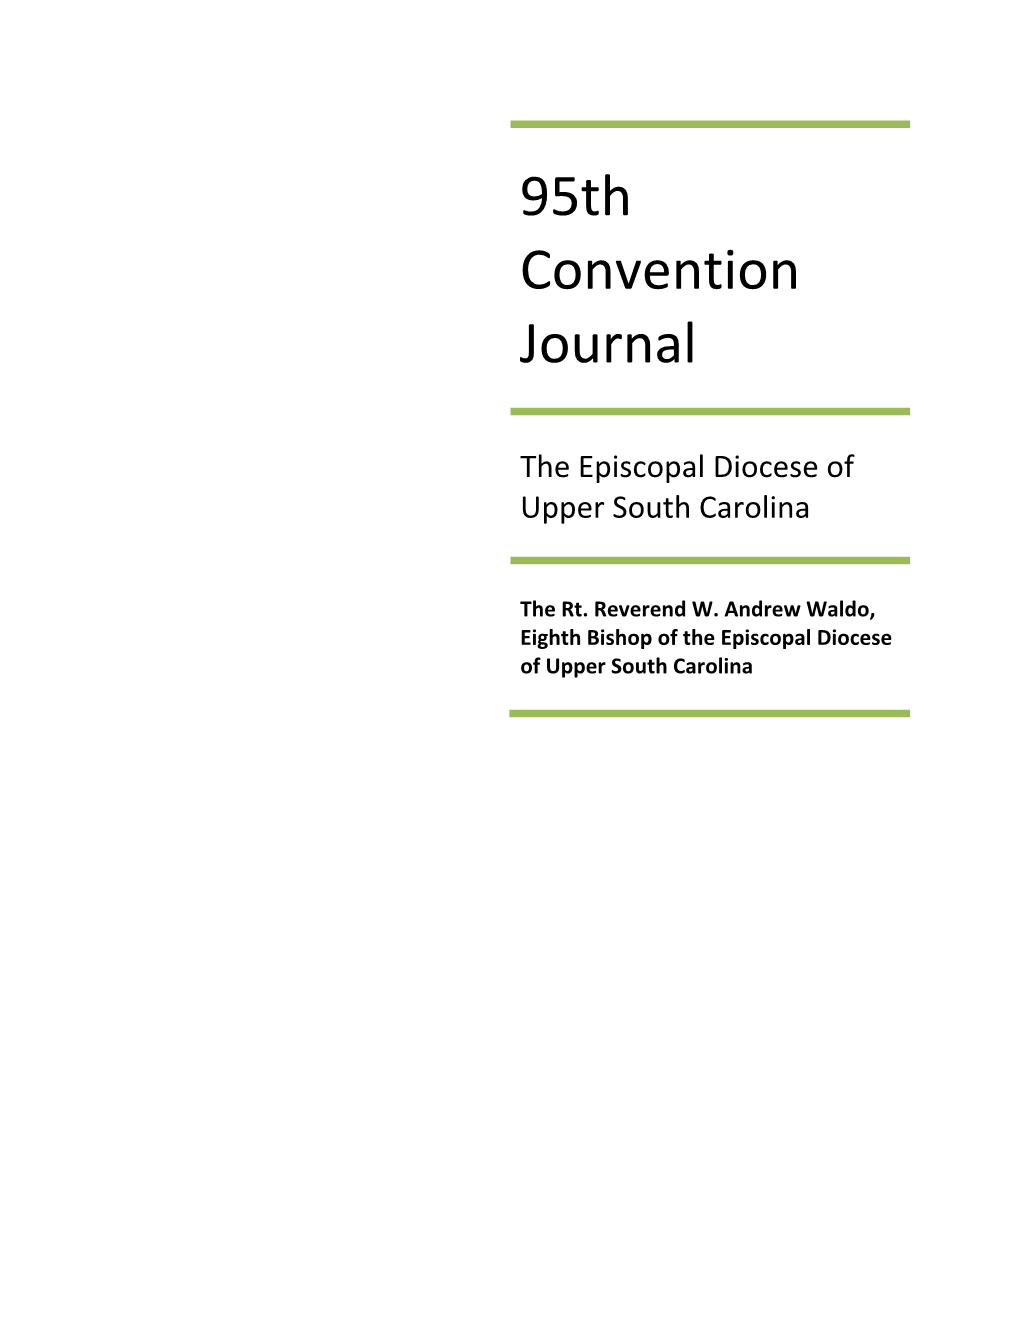 95Th Convention Journal